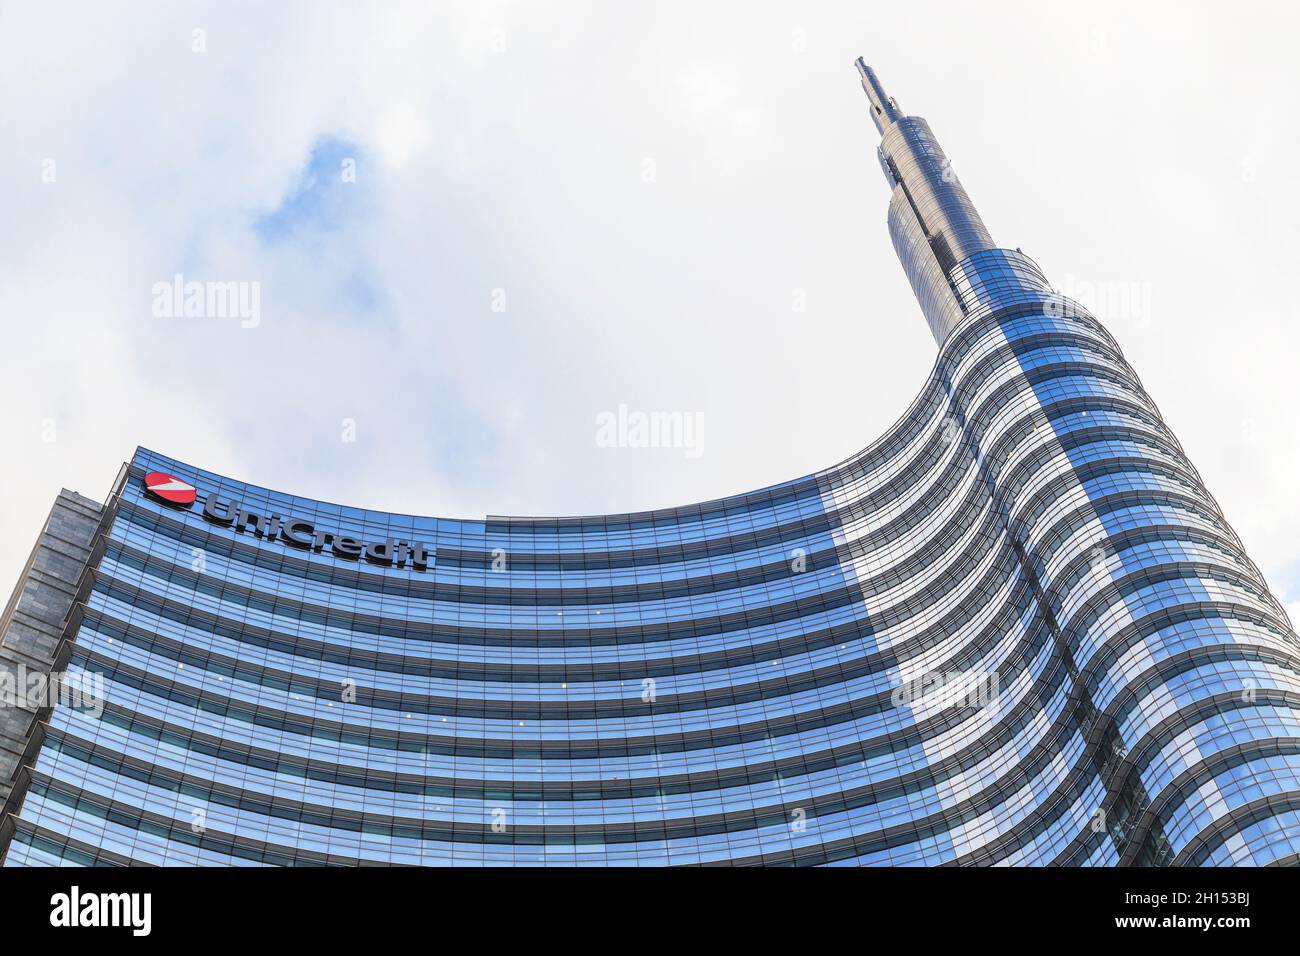 MILAN, ITALY - MAY 17, 2018: This is the top of the Skyscraper Torre Unicredit, which is the highest building in Italy. Stock Photo